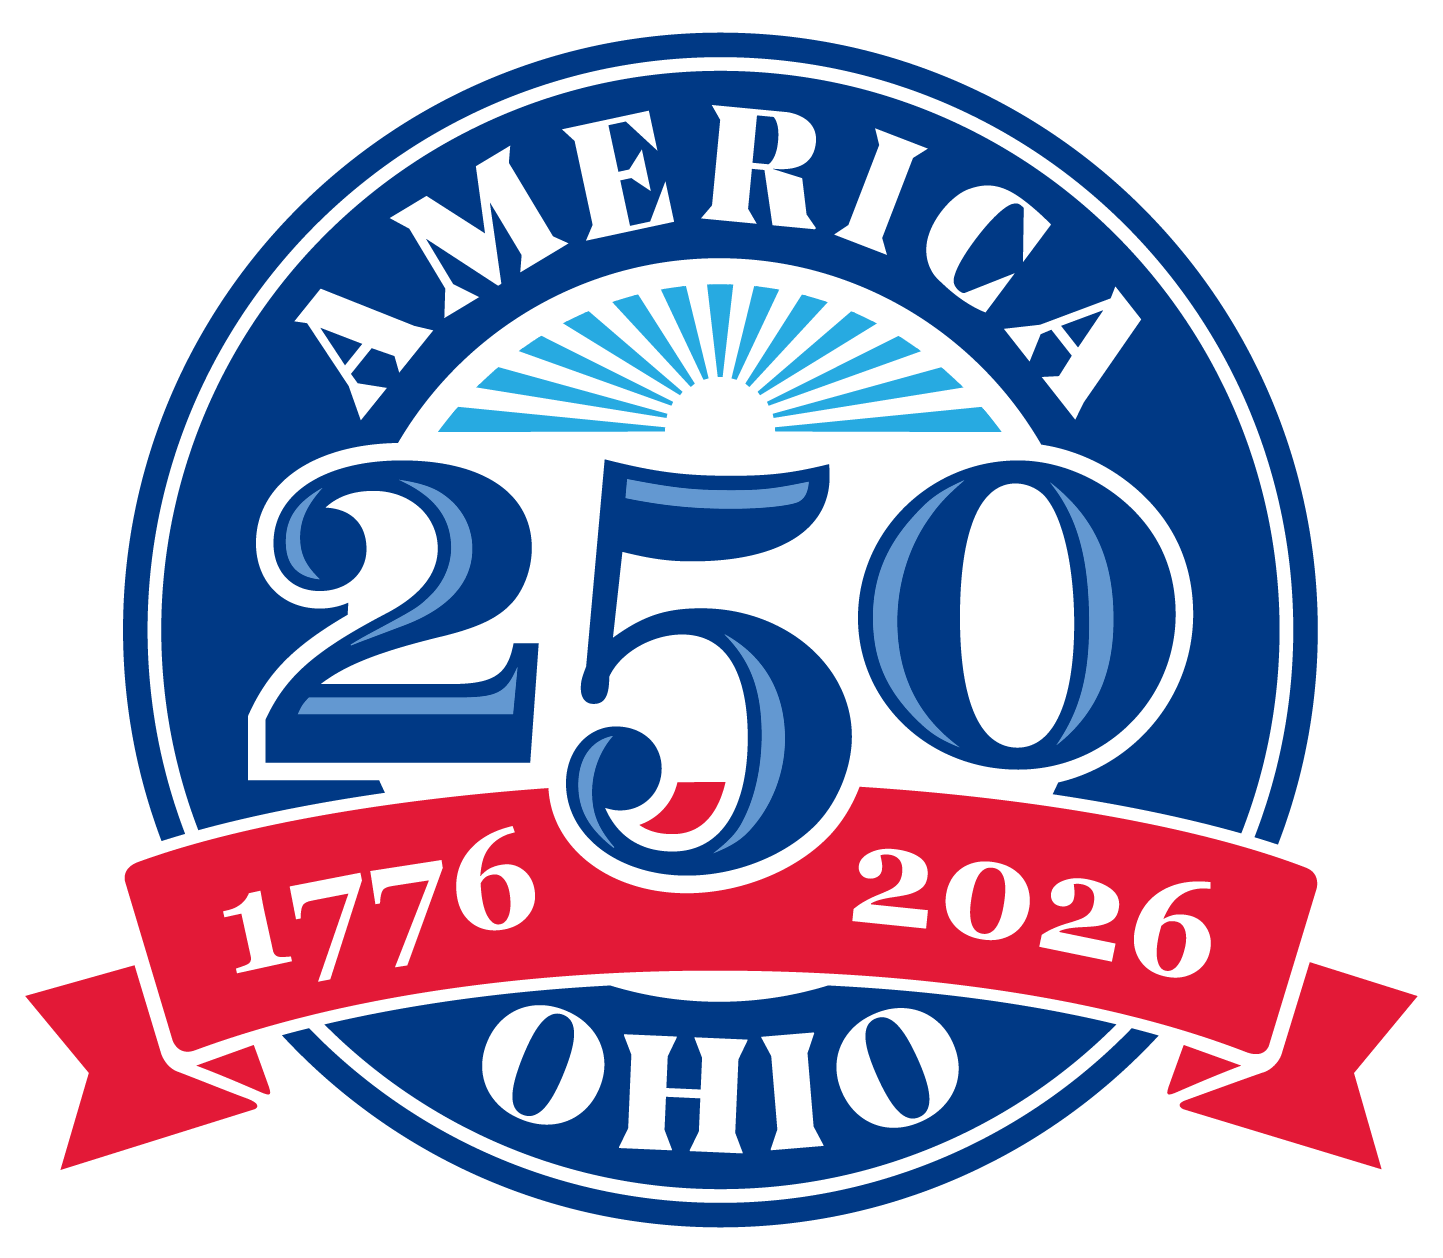 Monday After: Stark joins effort to prepare for America's 250th birthday